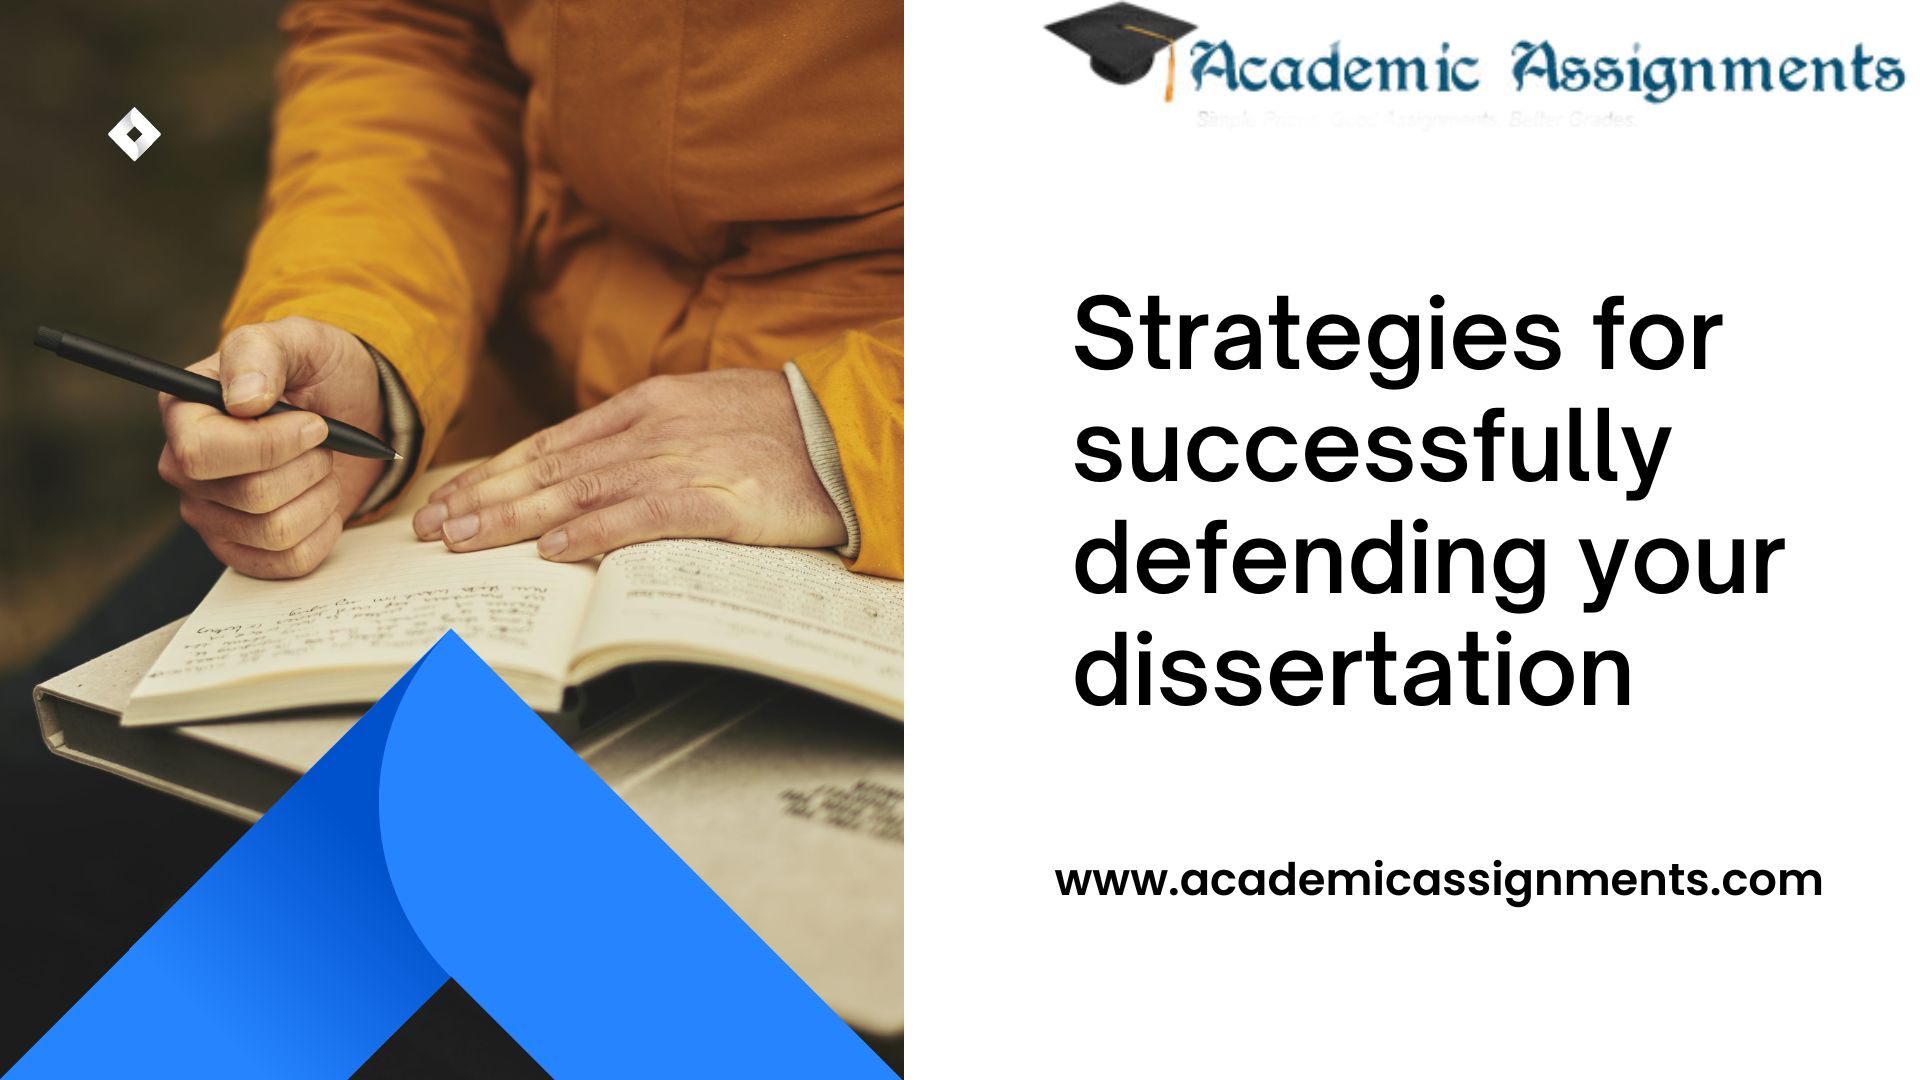 Strategies for successfully defending your dissertation